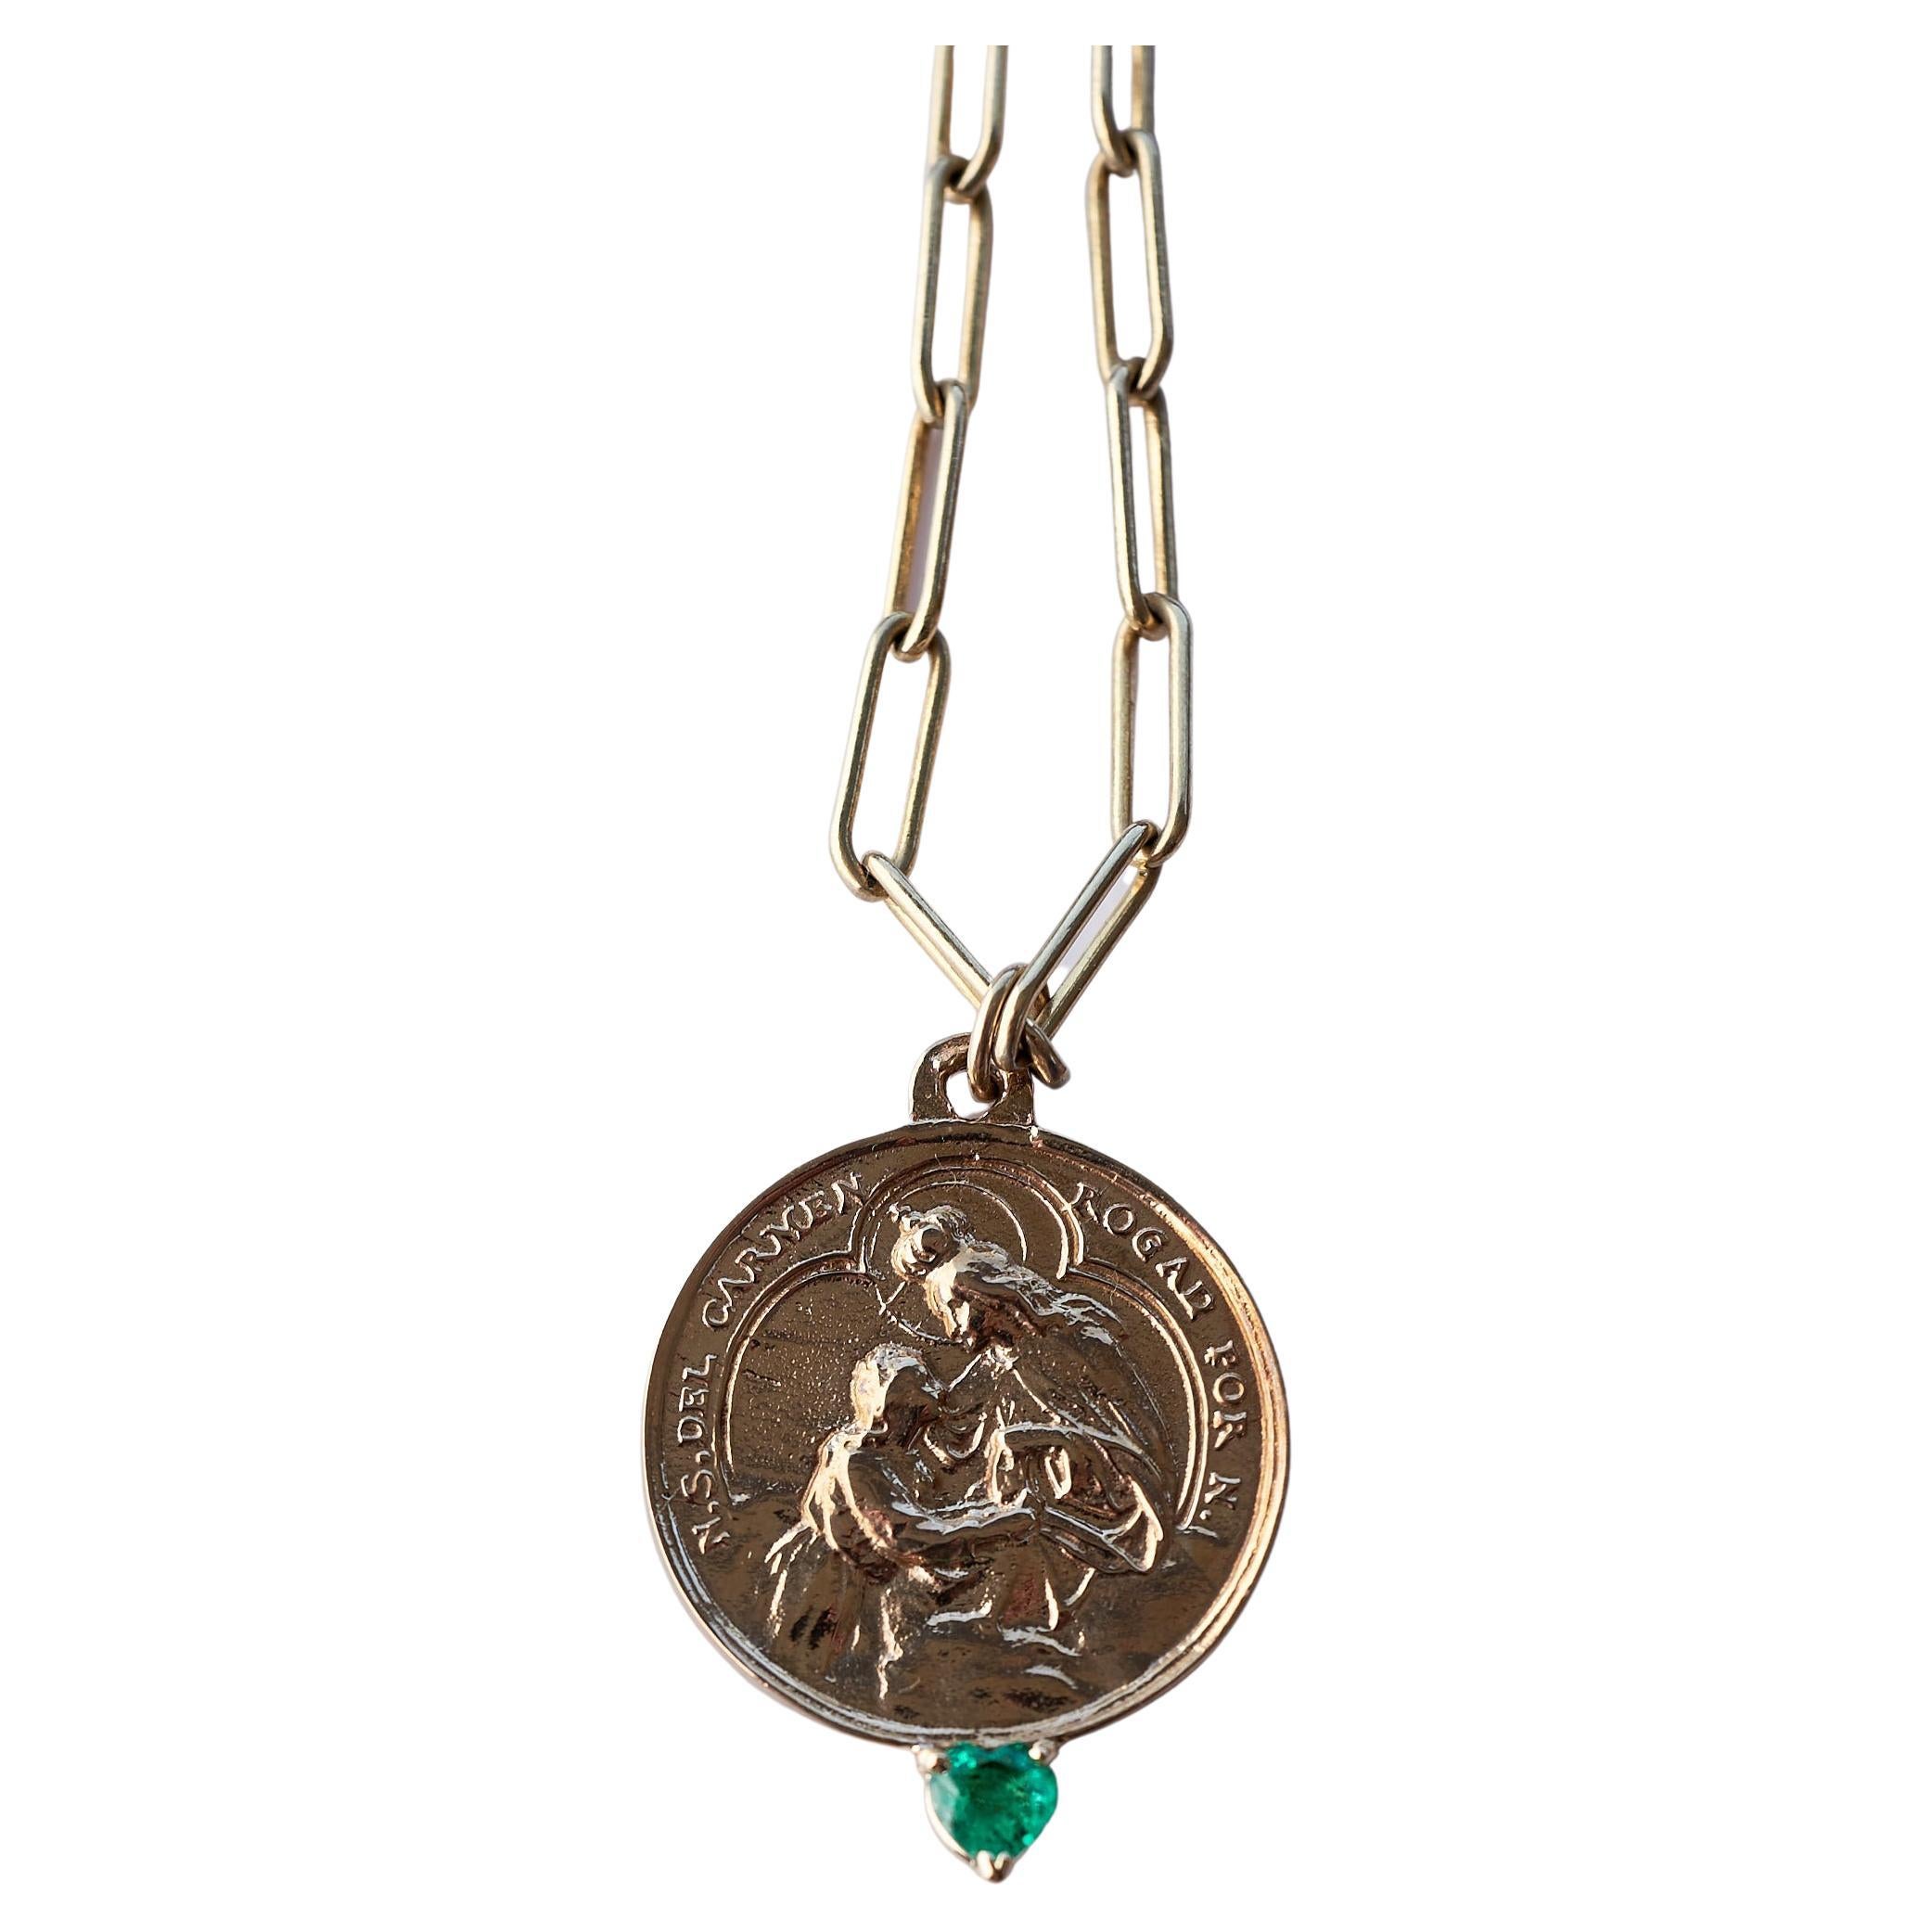 Emerald Heart Medal Necklace Chain Virgin Mary Pendant J Dauphin For Sale